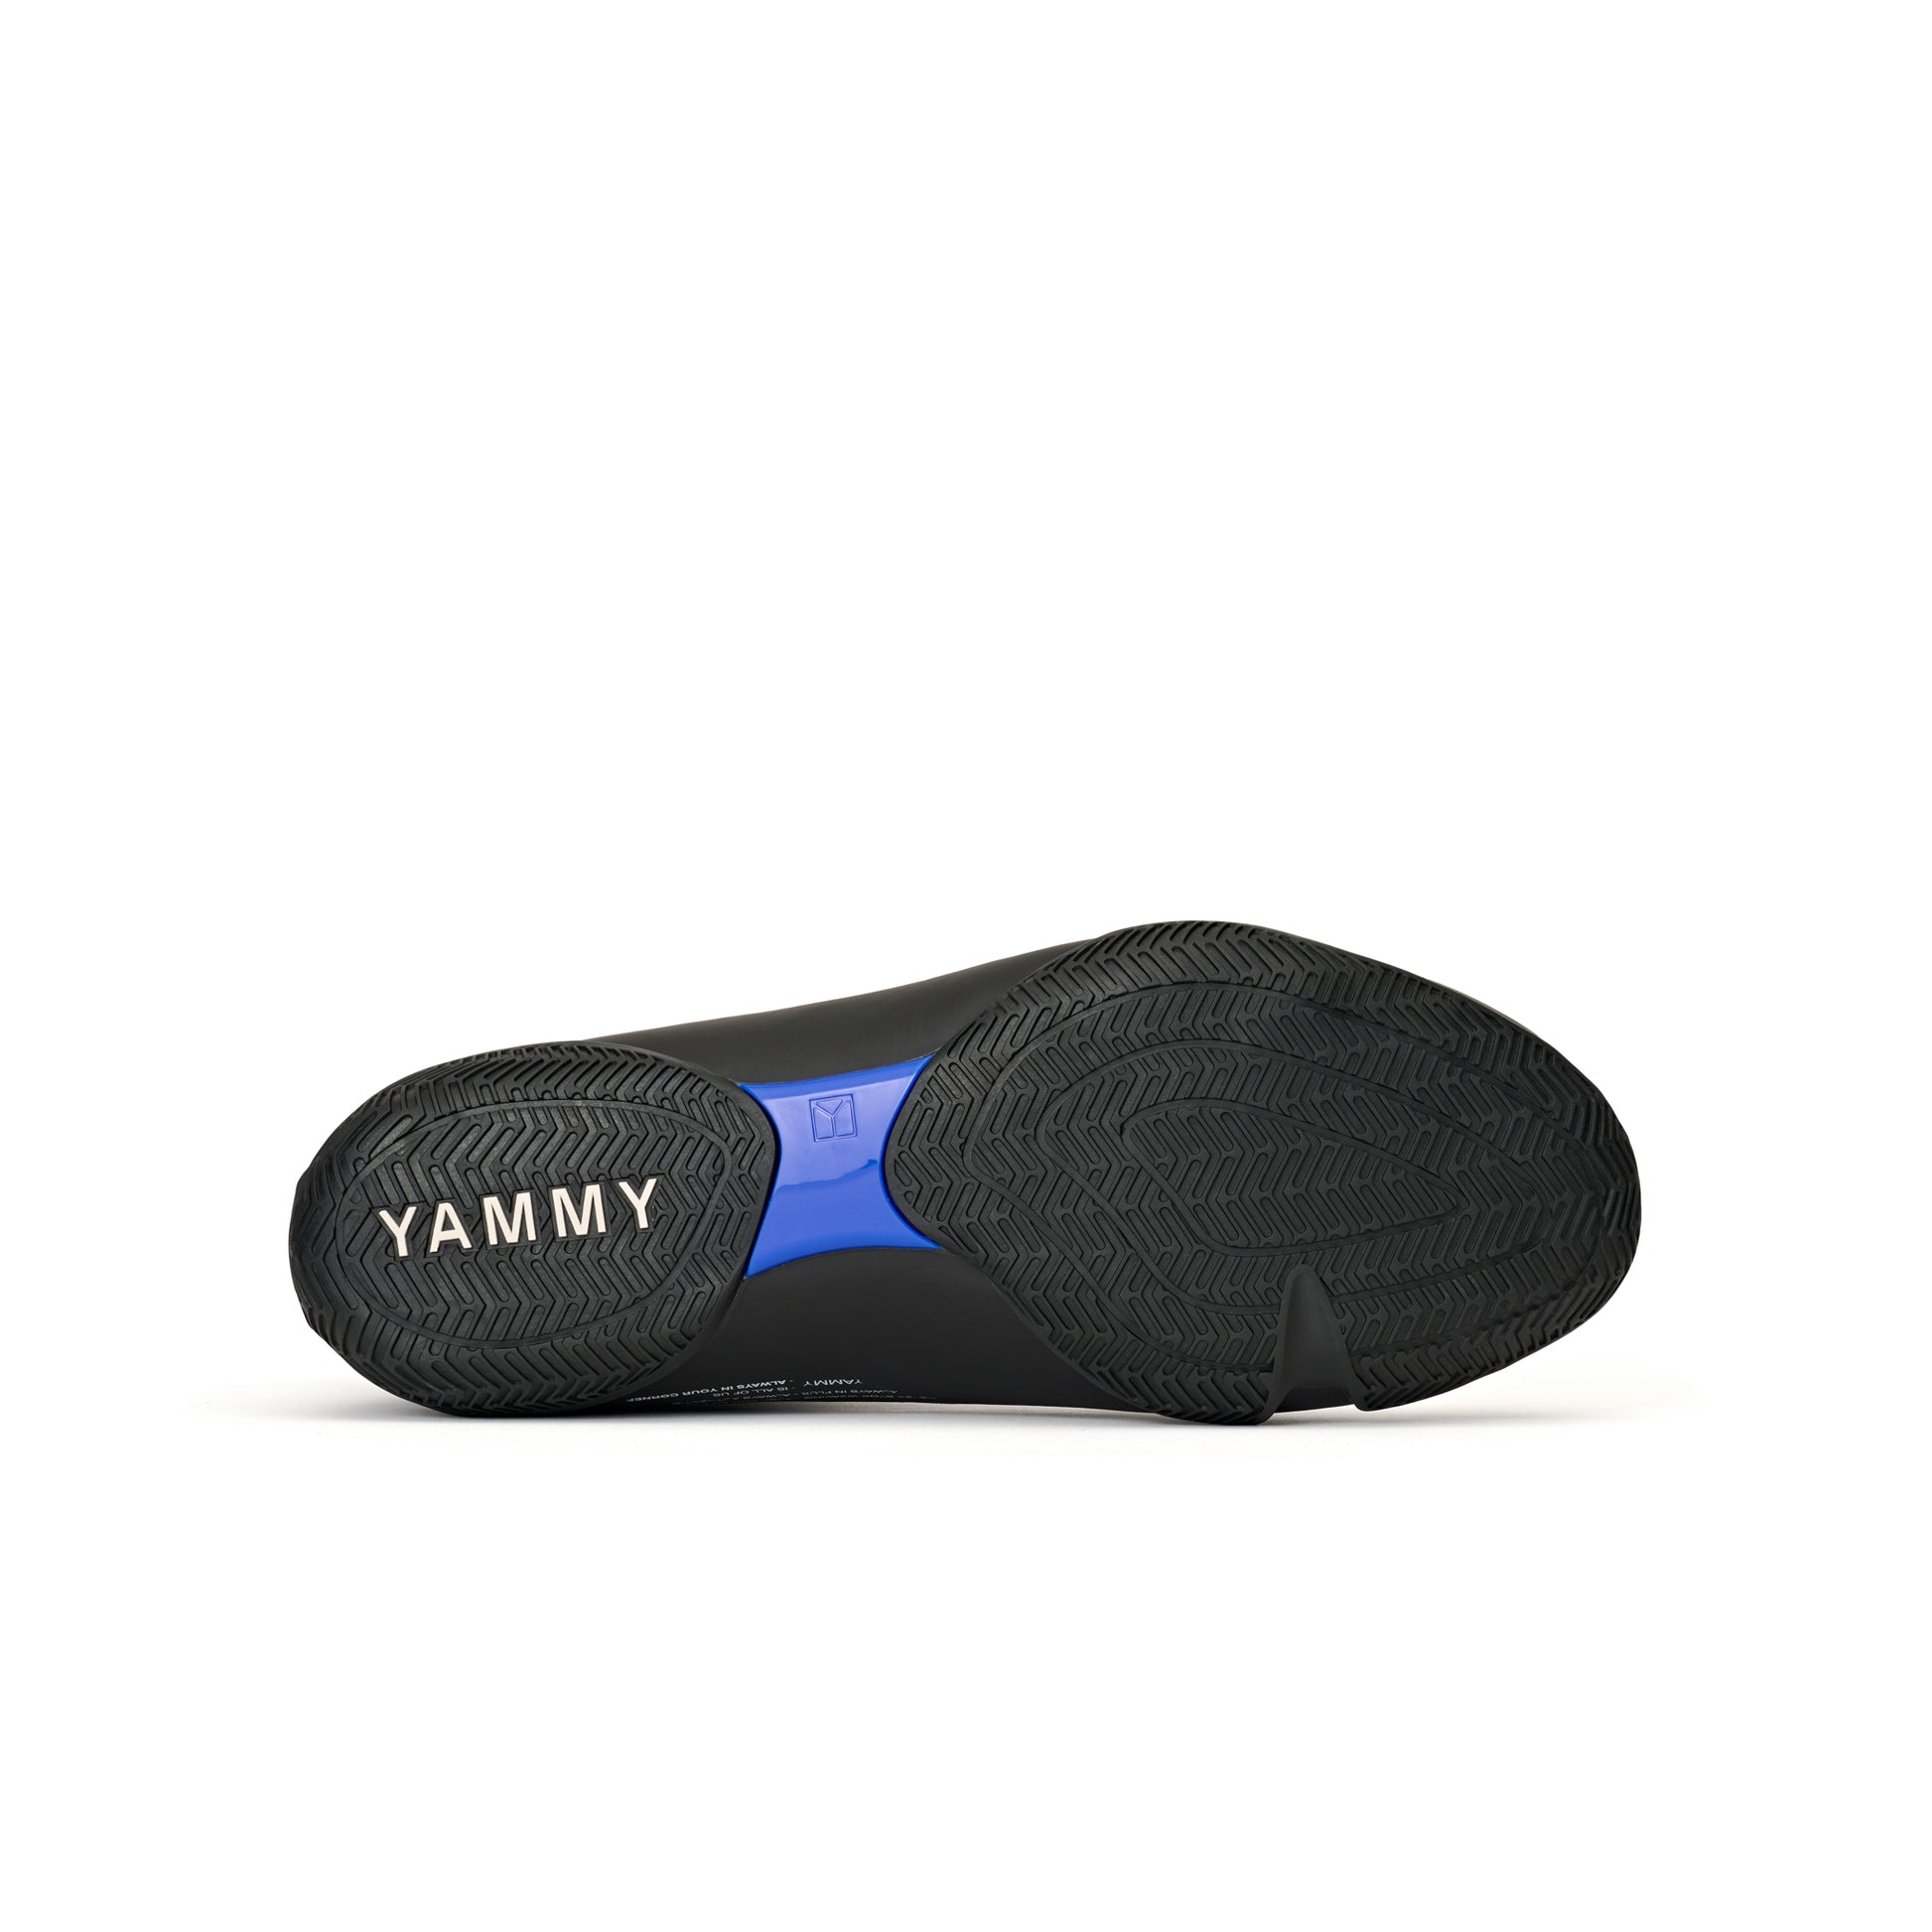 YAMMY Flux Mid Blackout boxing boots